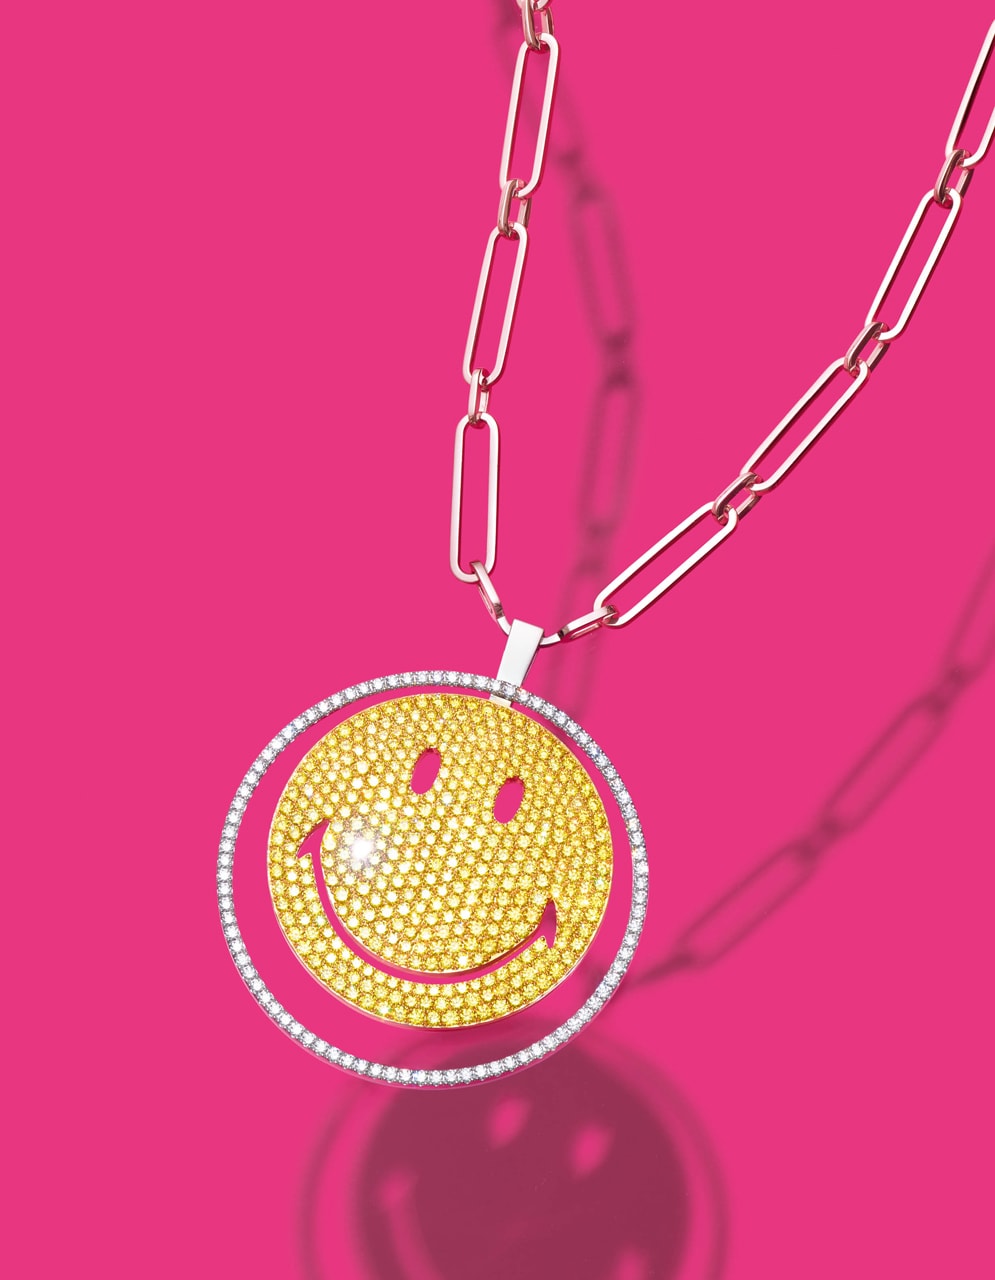 SMILEY Messika Jewelry Set To Release a 7.90 Carat Diamond Novelty for SMILEYs 50th Anniversary